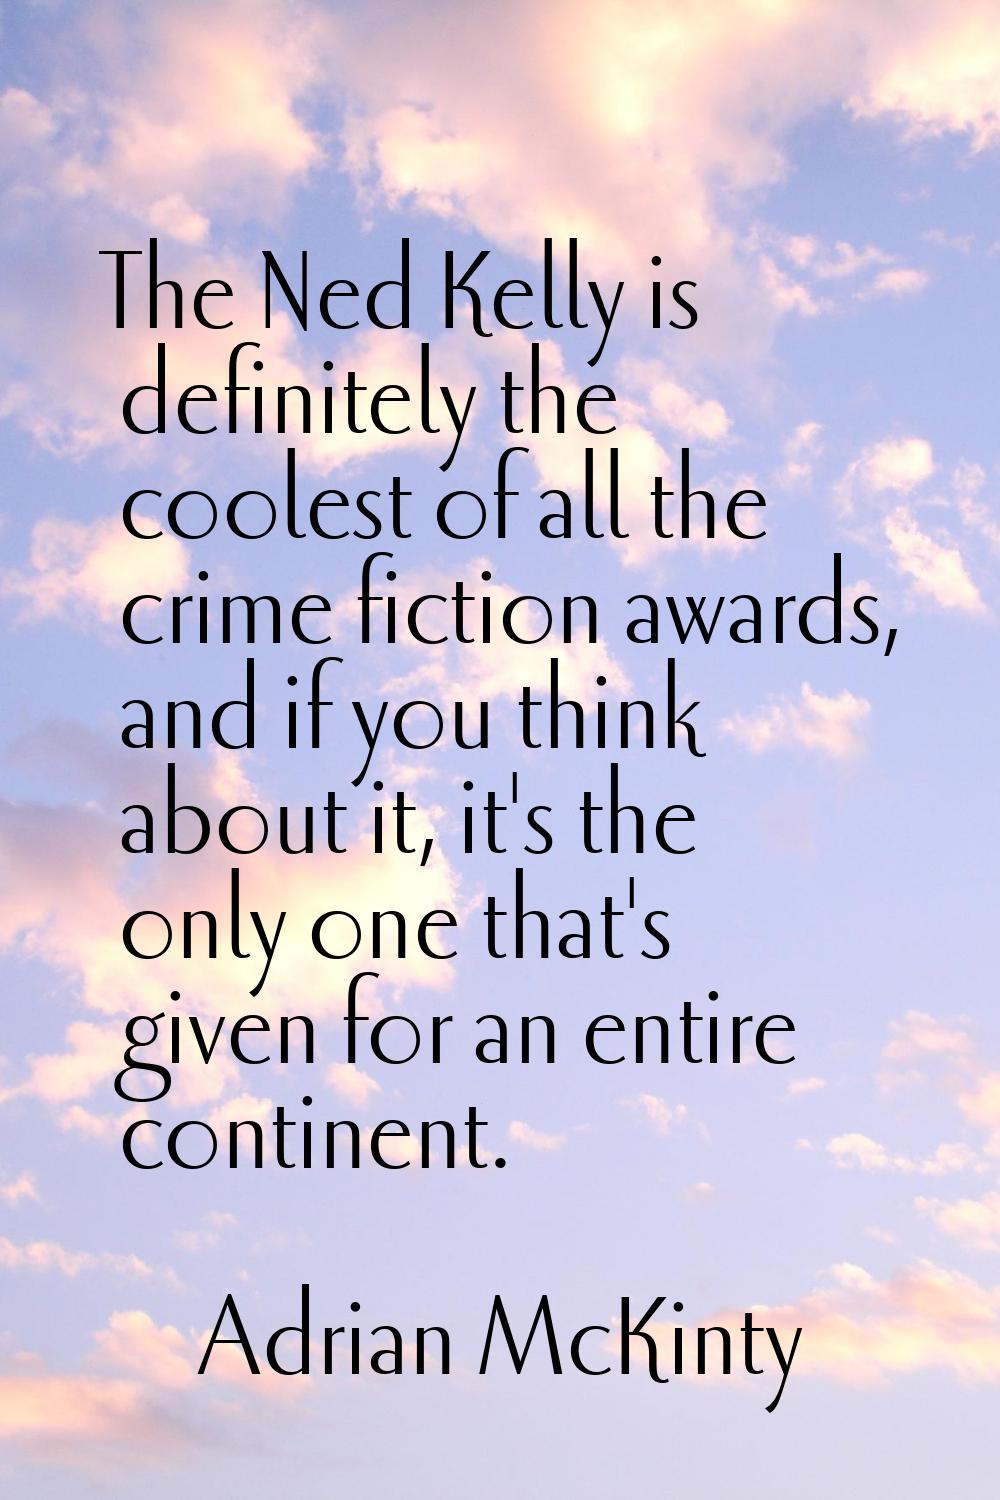 The Ned Kelly is definitely the coolest of all the crime fiction awards, and if you think about it,